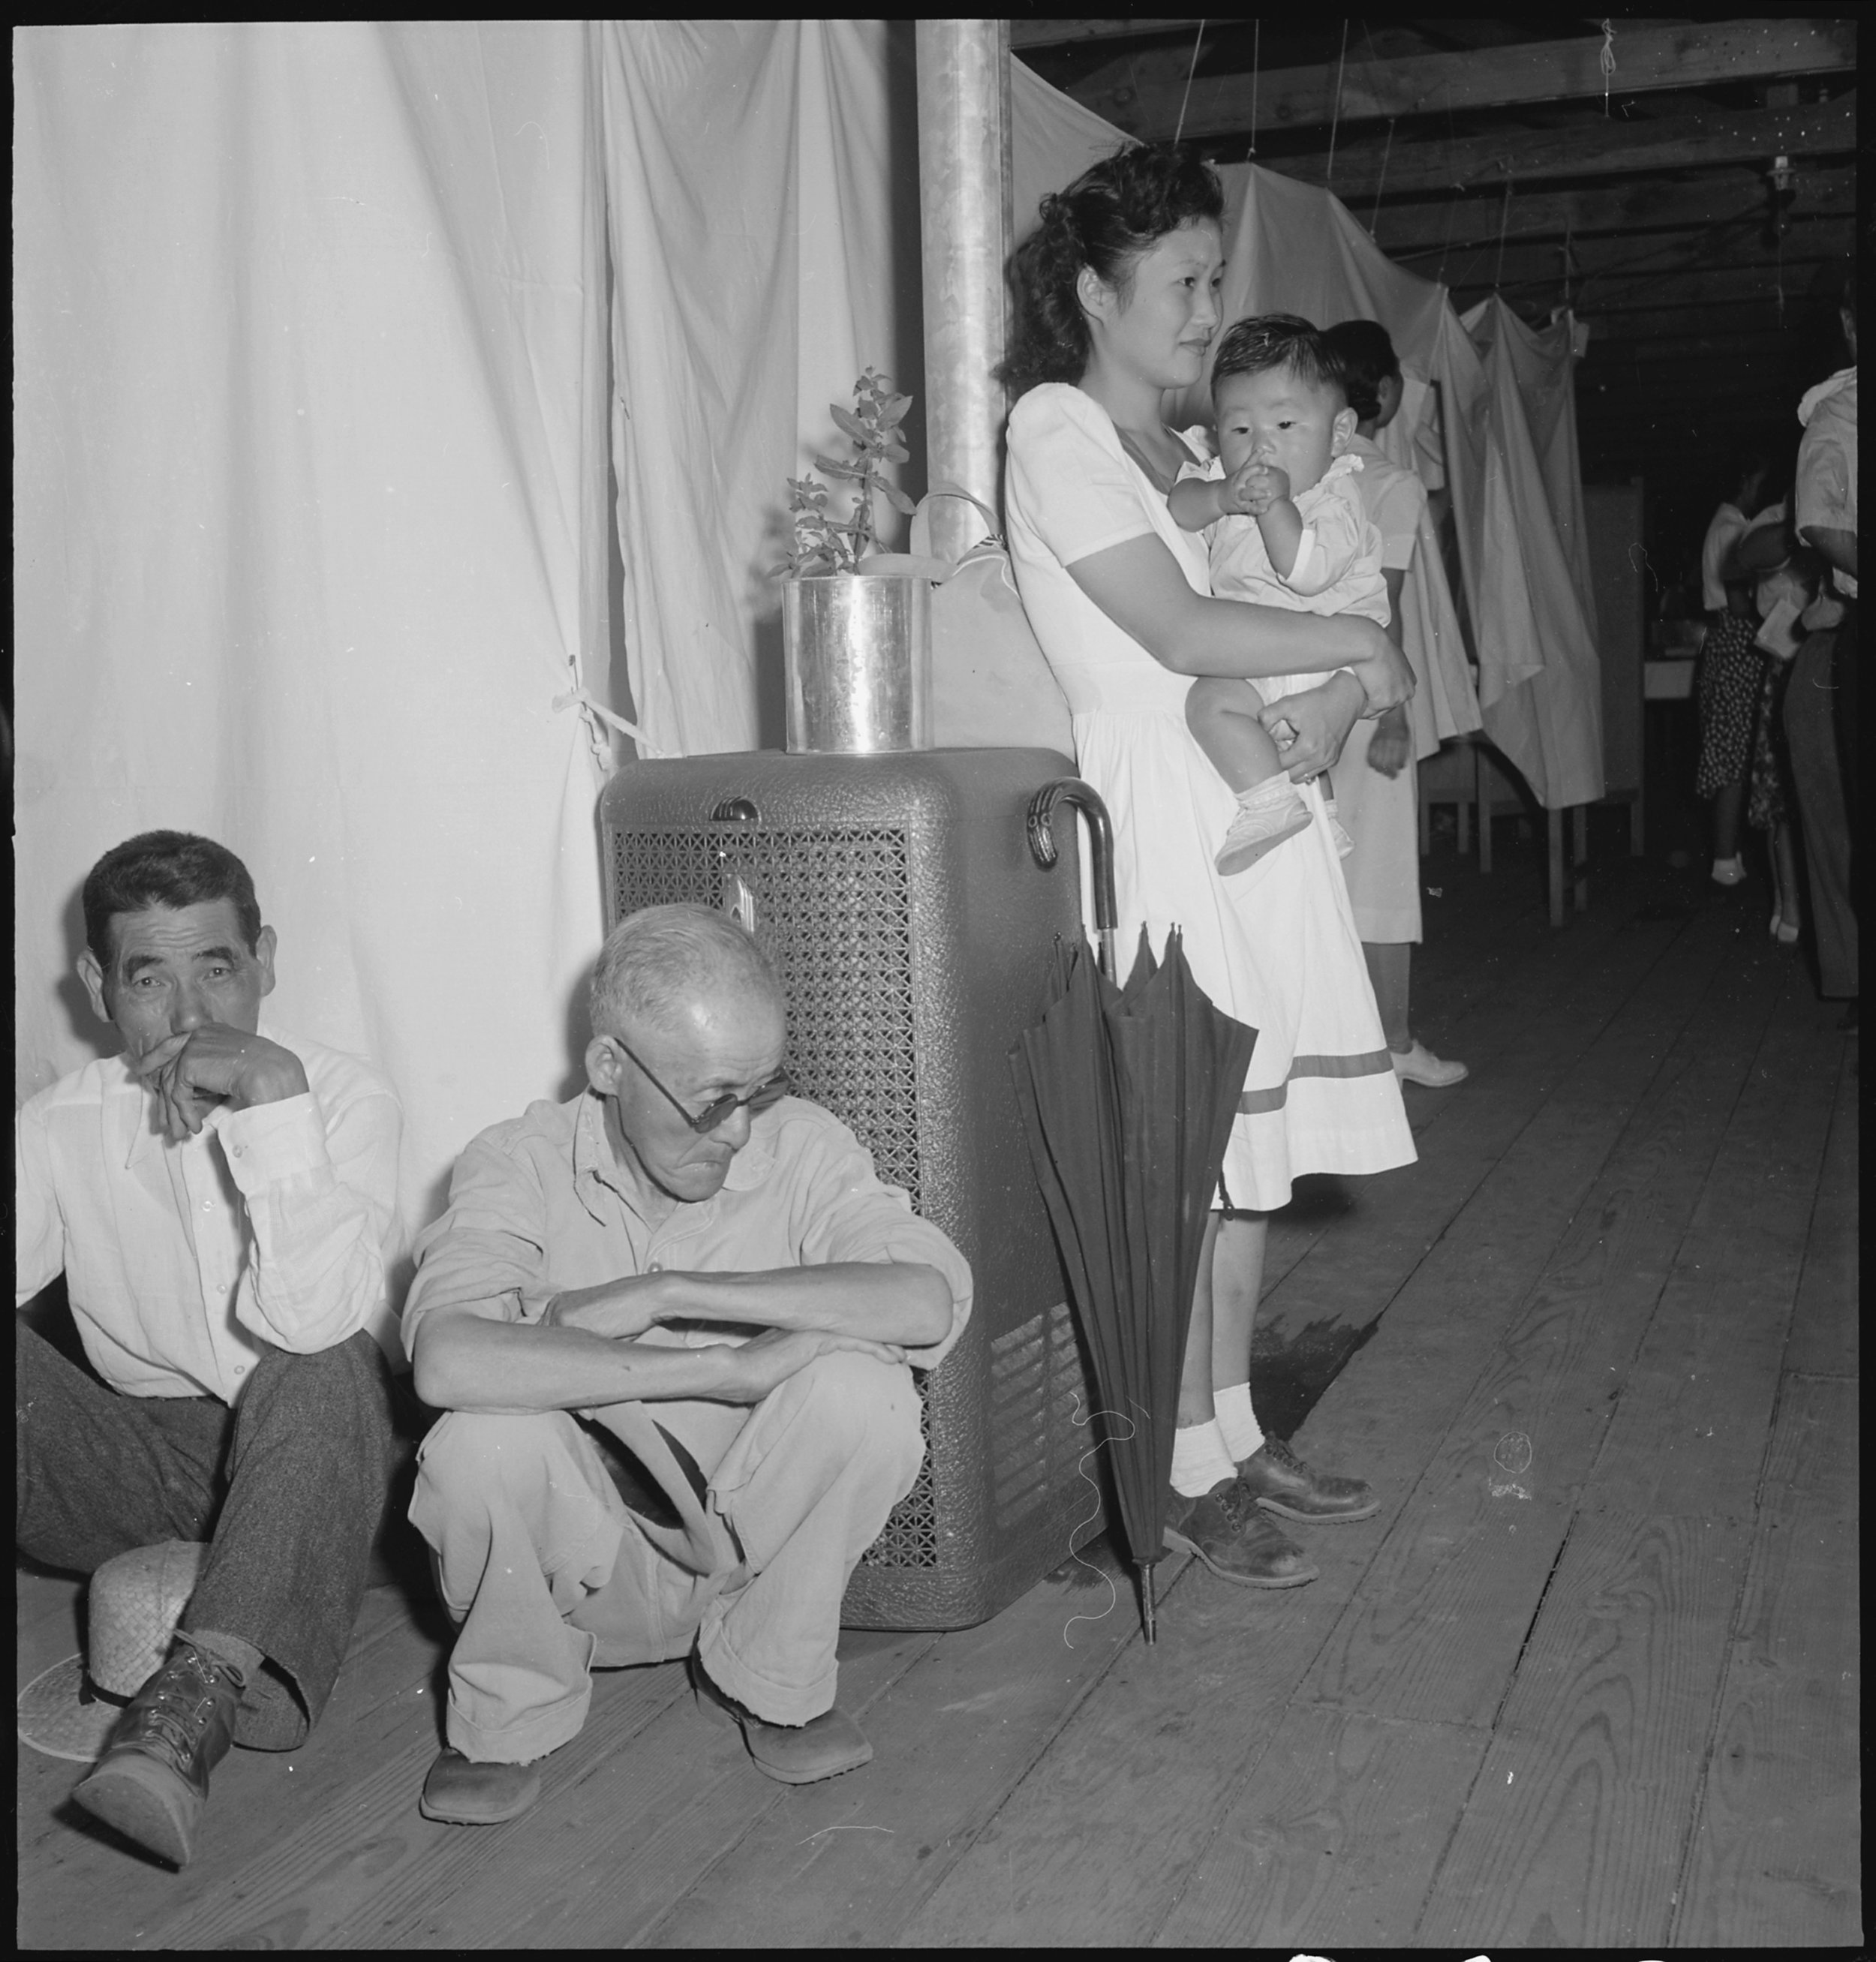  Manzanar Relocation Center, Manzanar, California. A typical interior scene in one of the barrack apartments at this center. Note the cloth partition which lends a small amount of privacy. 